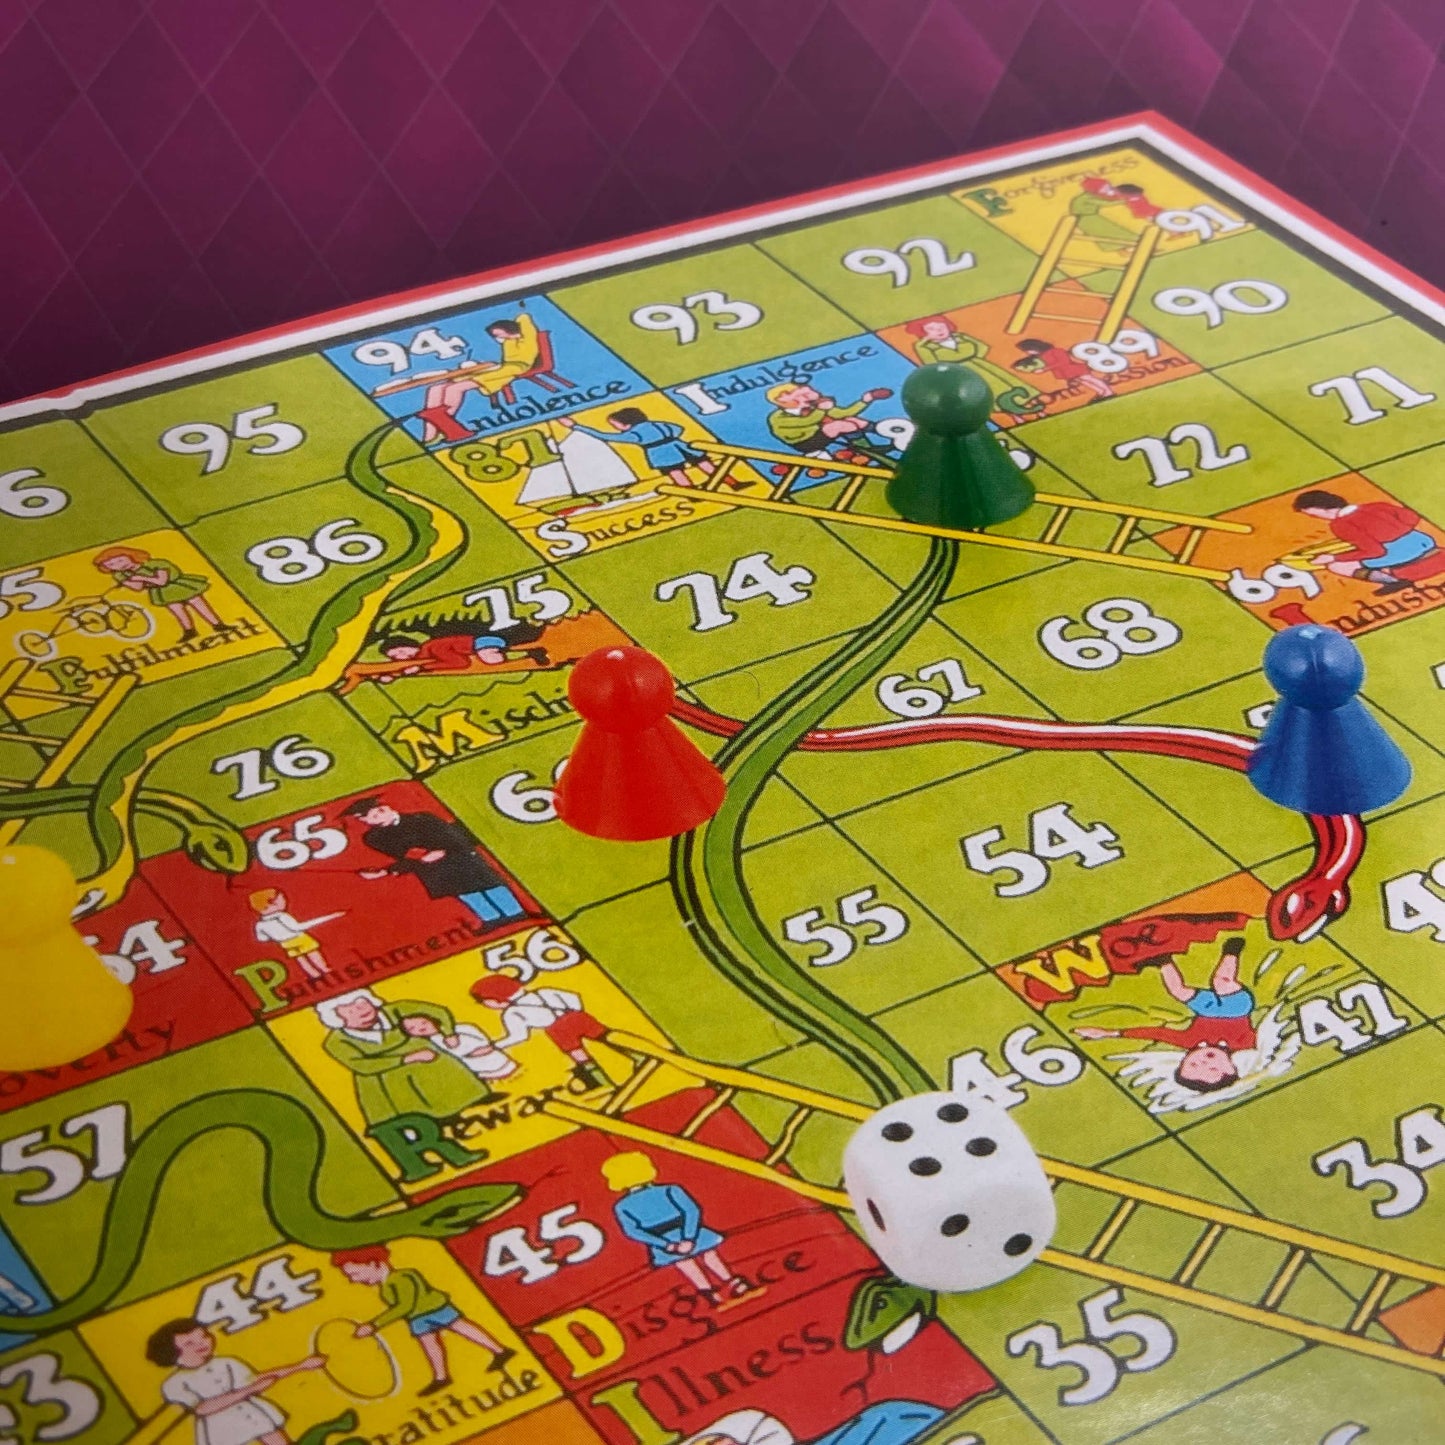 Snakes and ladders board game.